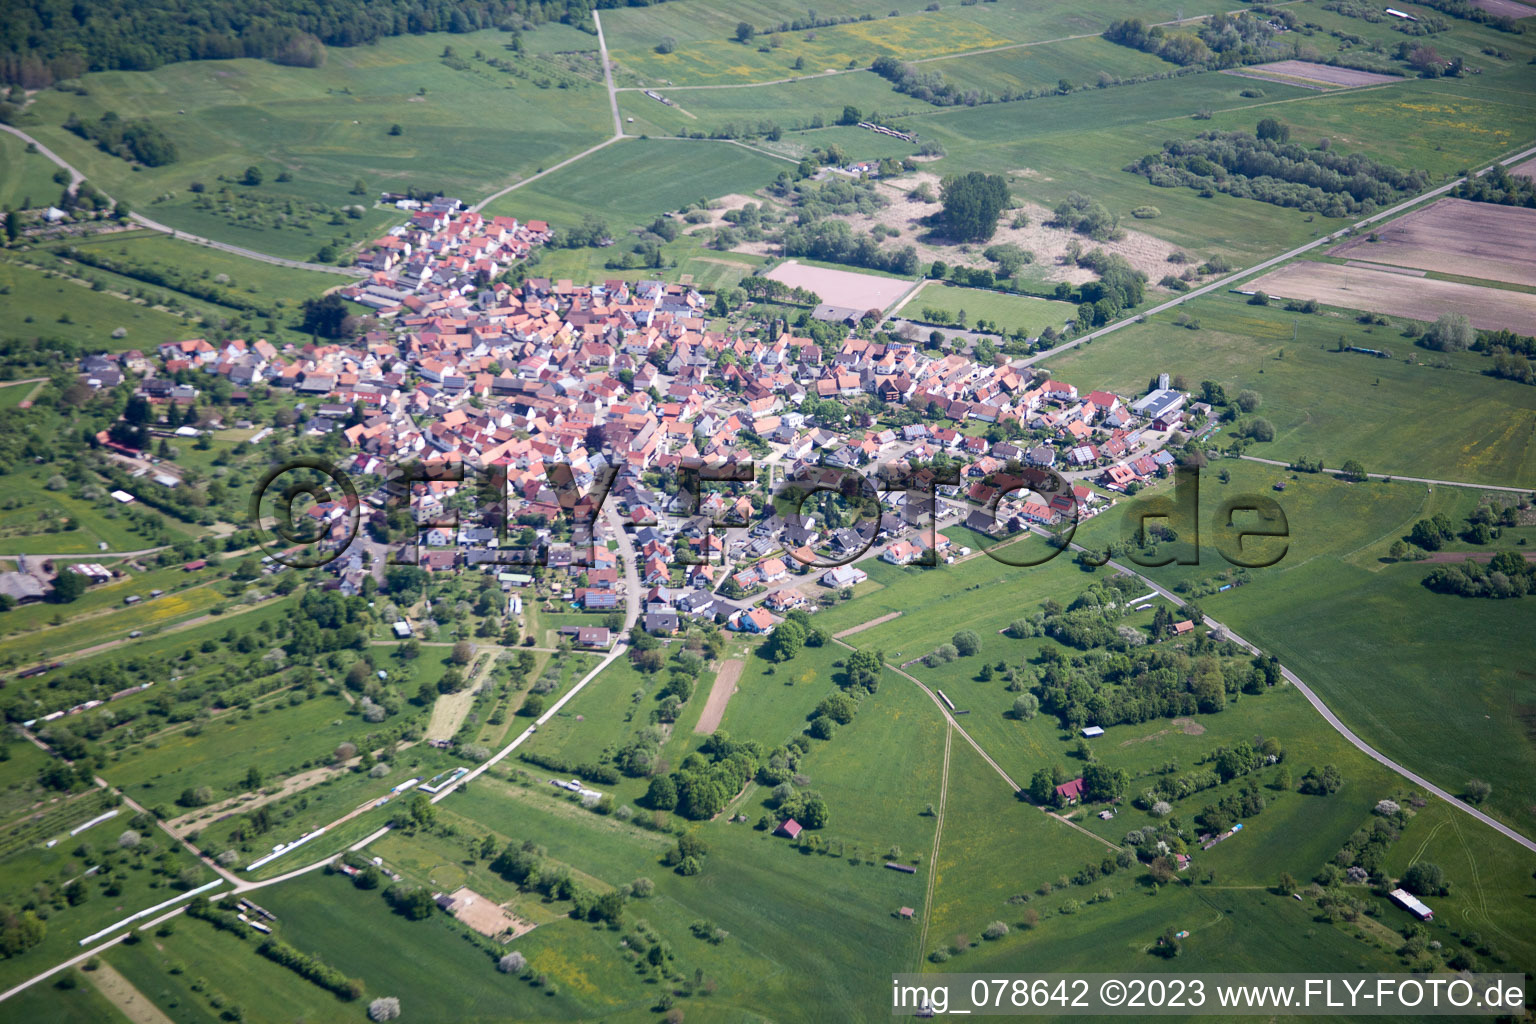 District Büchelberg in Wörth am Rhein in the state Rhineland-Palatinate, Germany out of the air